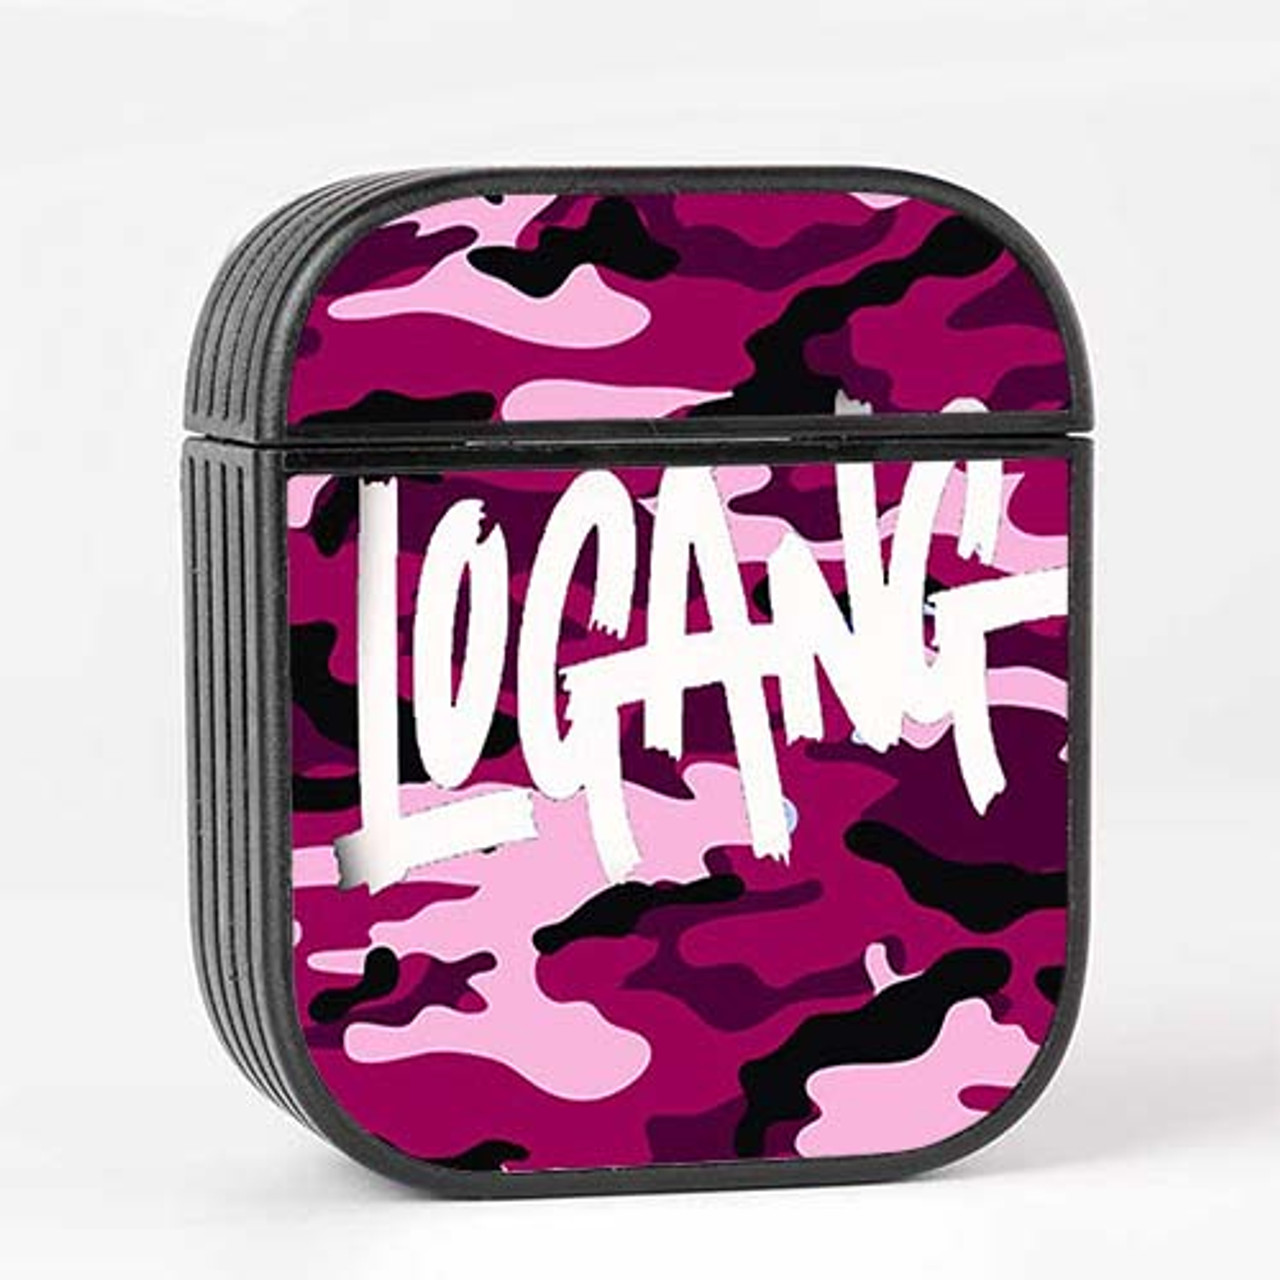 Pastele Logang Bape Custom Personalized AirPods Case Apple AirPods